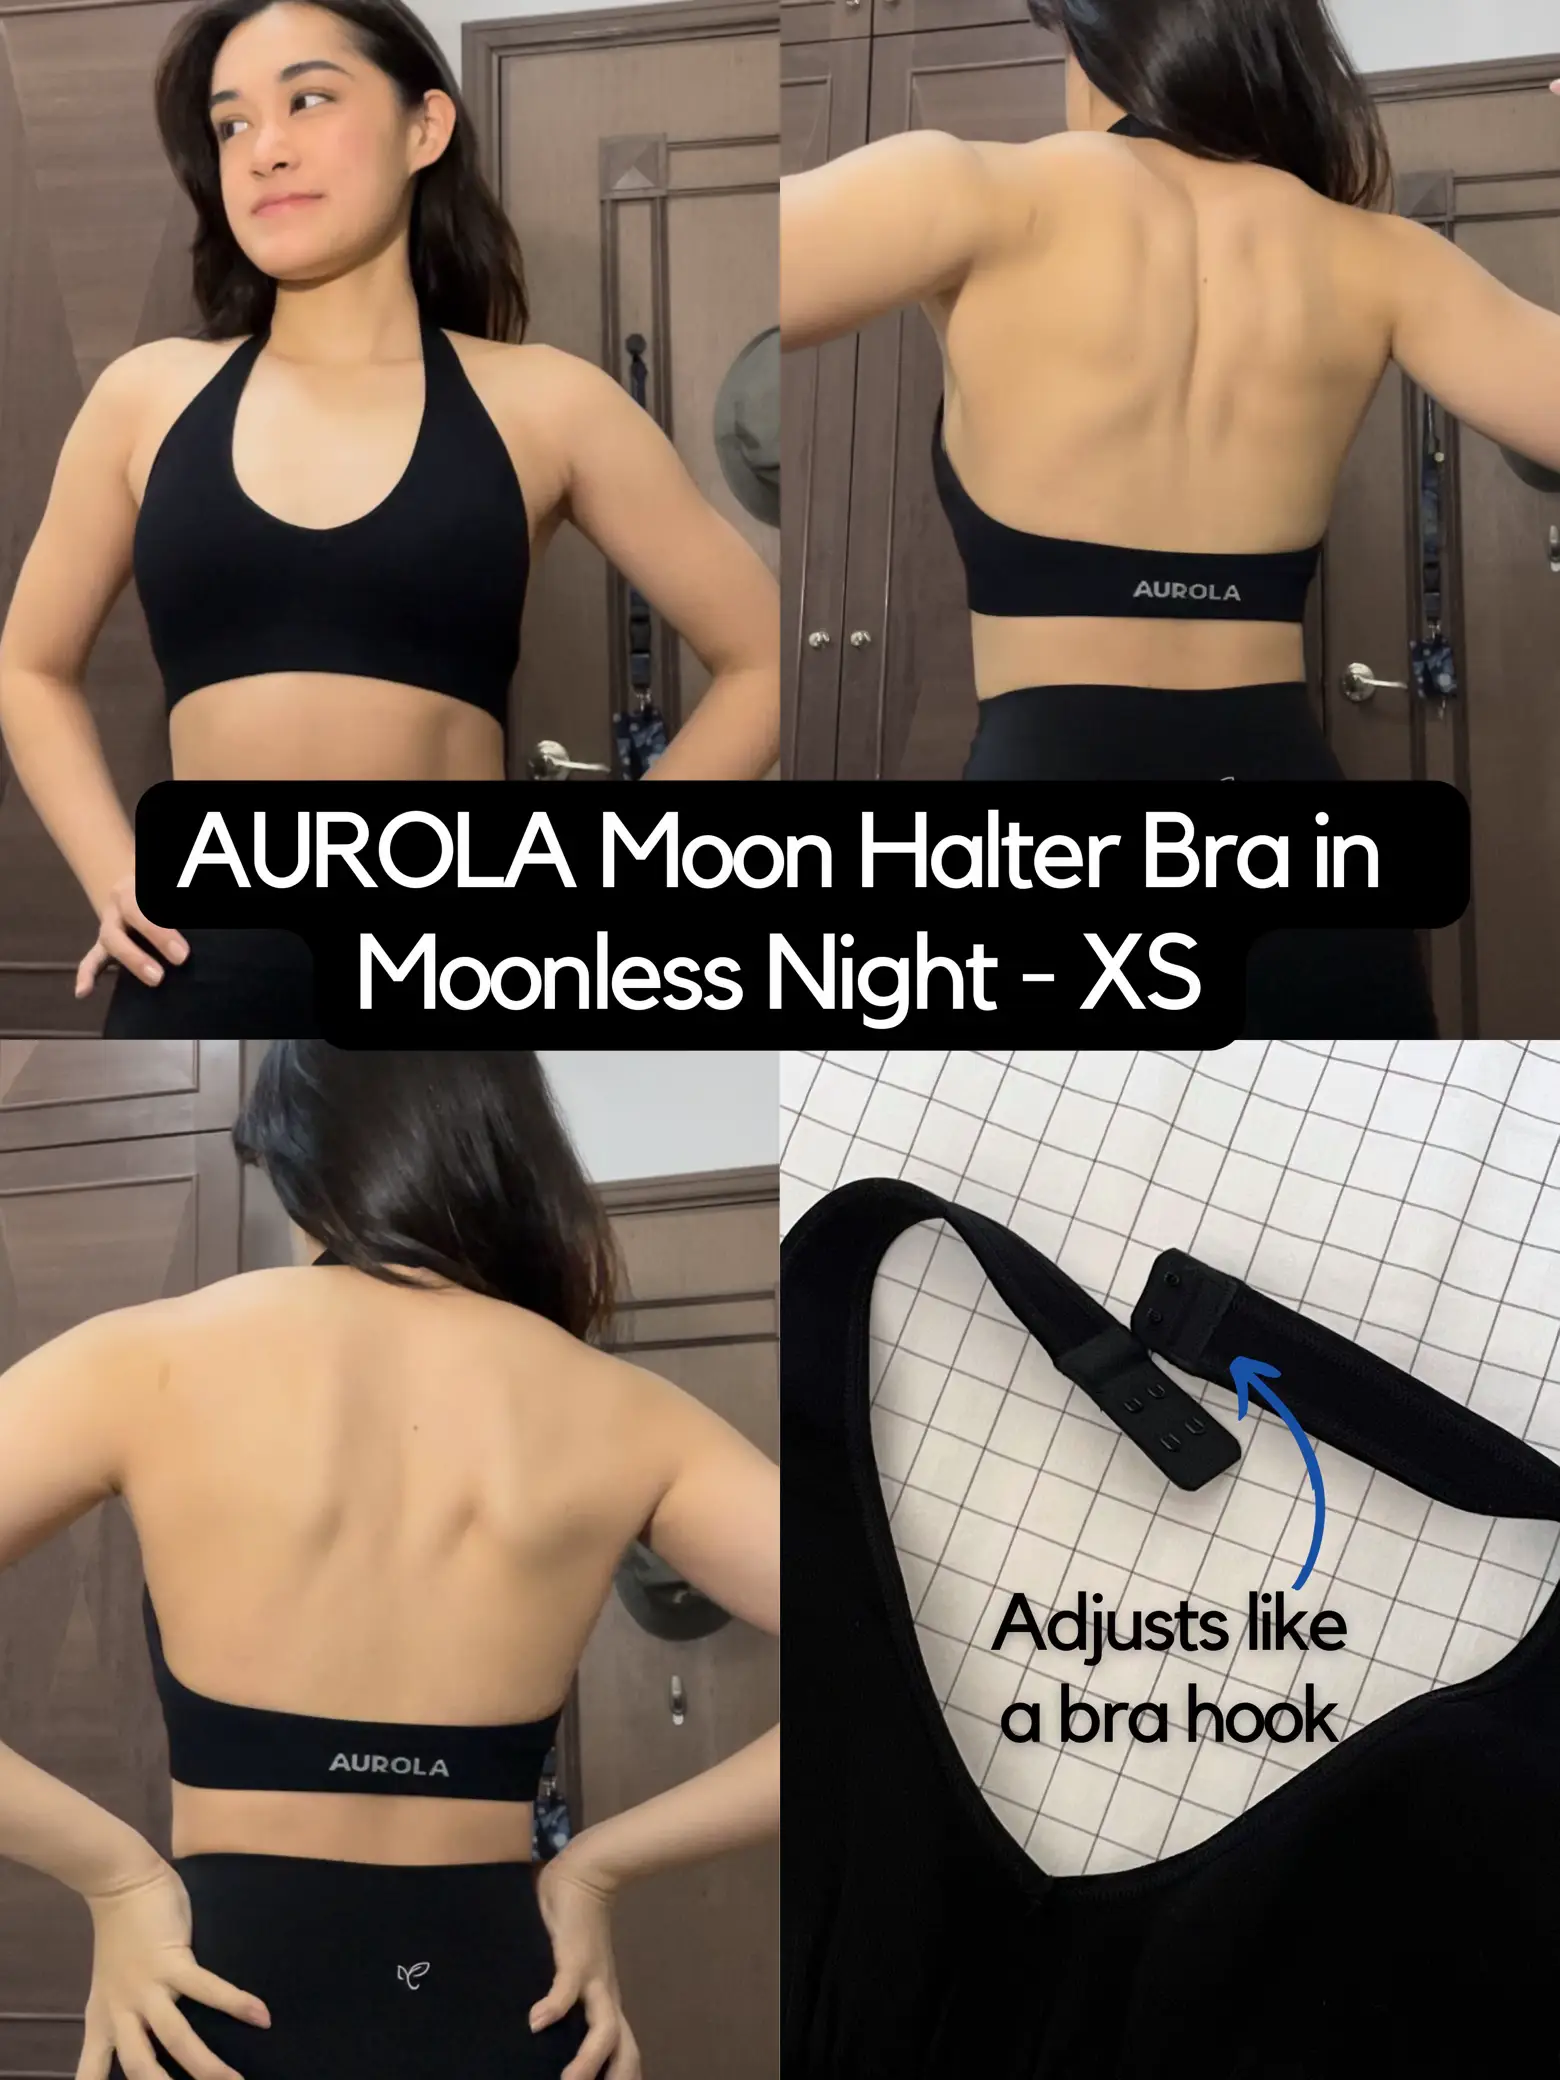 AUROLA Sports Bras Review!! COP or DROP 🤔, Gallery posted by Chloe 🦋